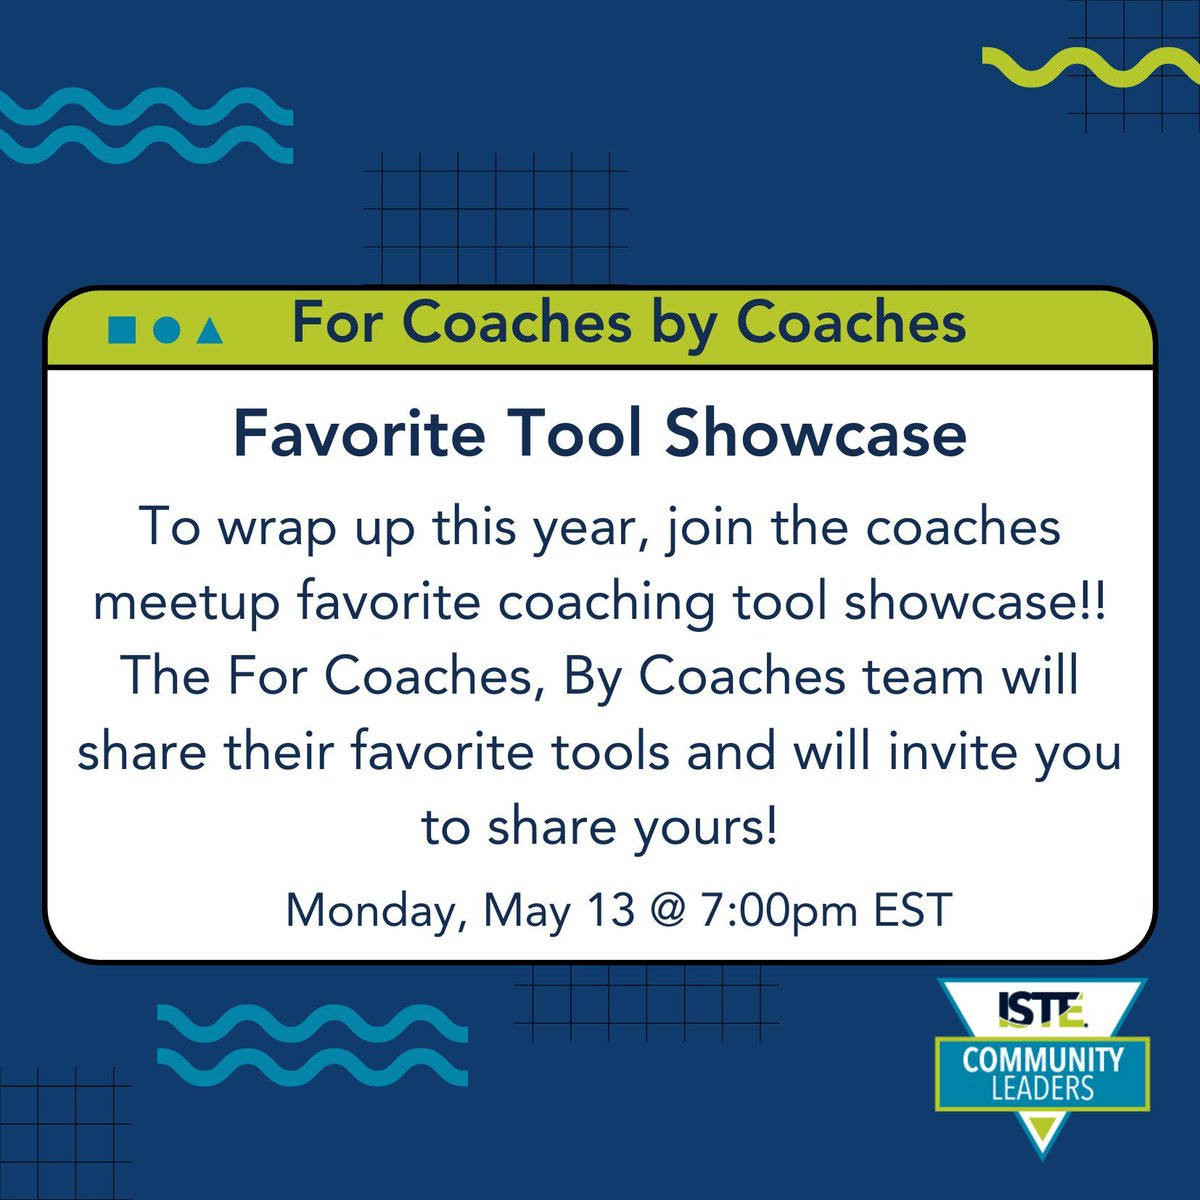 Join @ISTECommunity Leaders for the #Coaches meetup on Monday, May 13 at 7pm EST for the favorite tool showcase! Learn from others and share your own favorite tool! ✅Register here: buff.ly/3UBDKyR #ForCoachesByCoaches